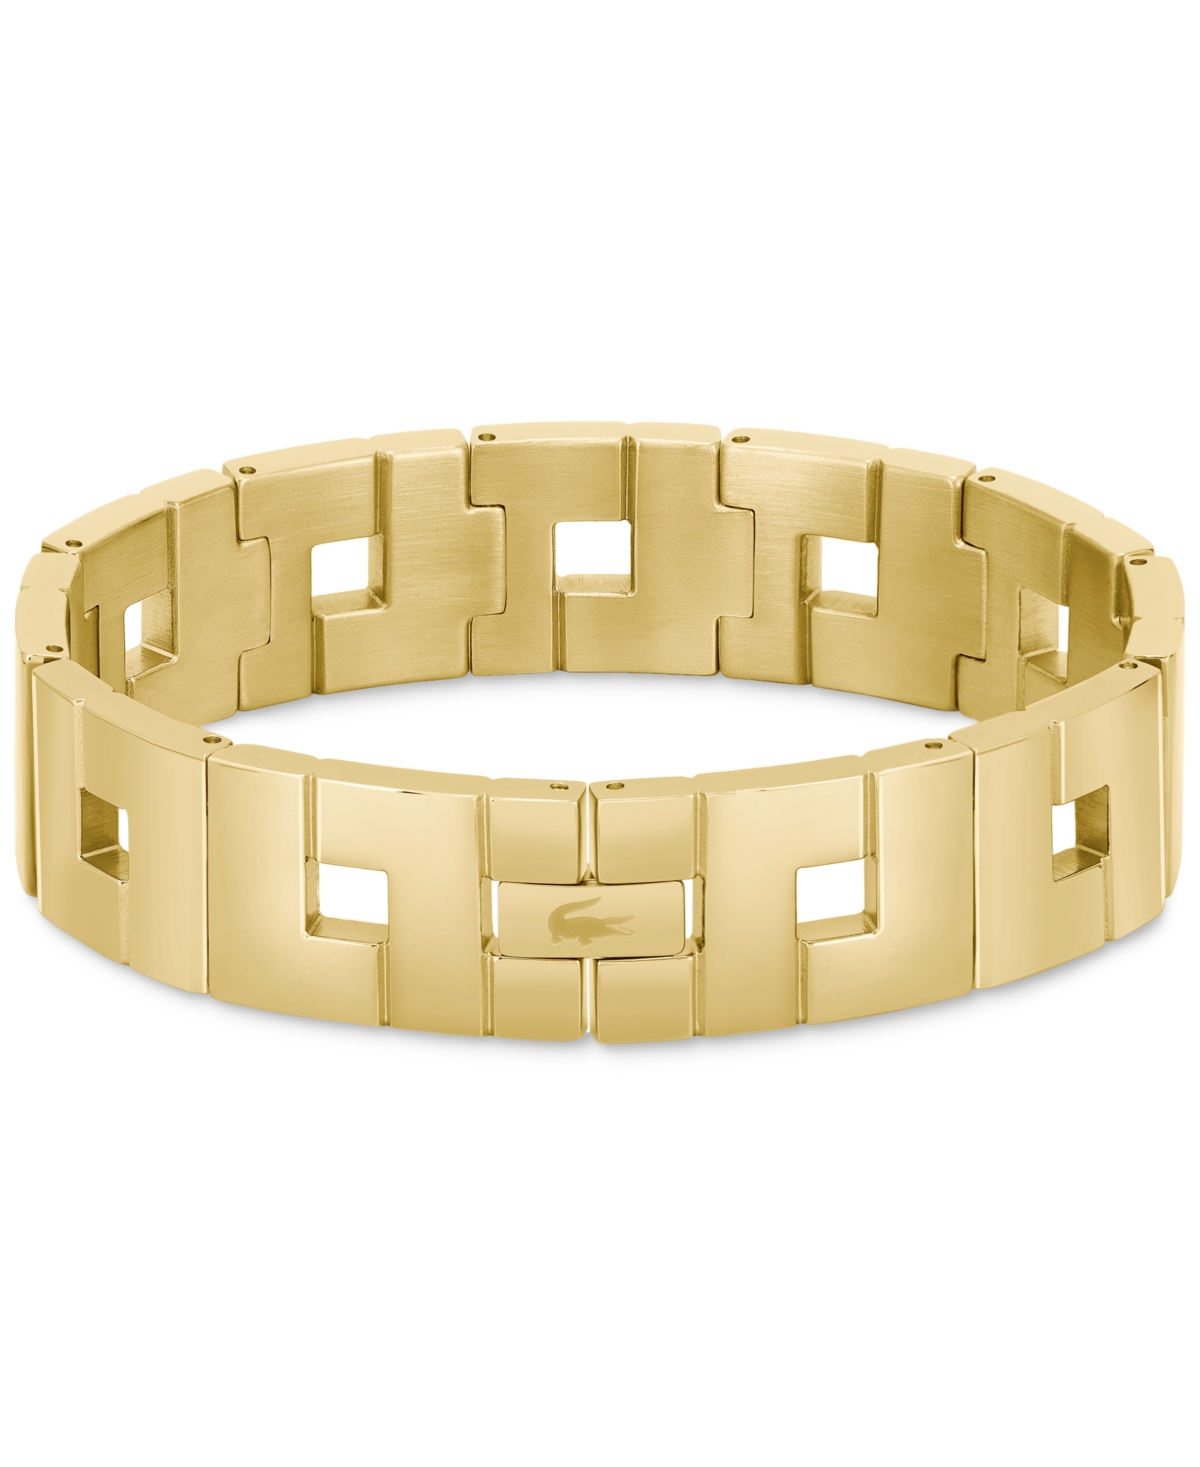 Gold-Tone Stainless Steel Thea Chain Bracelet - Gold